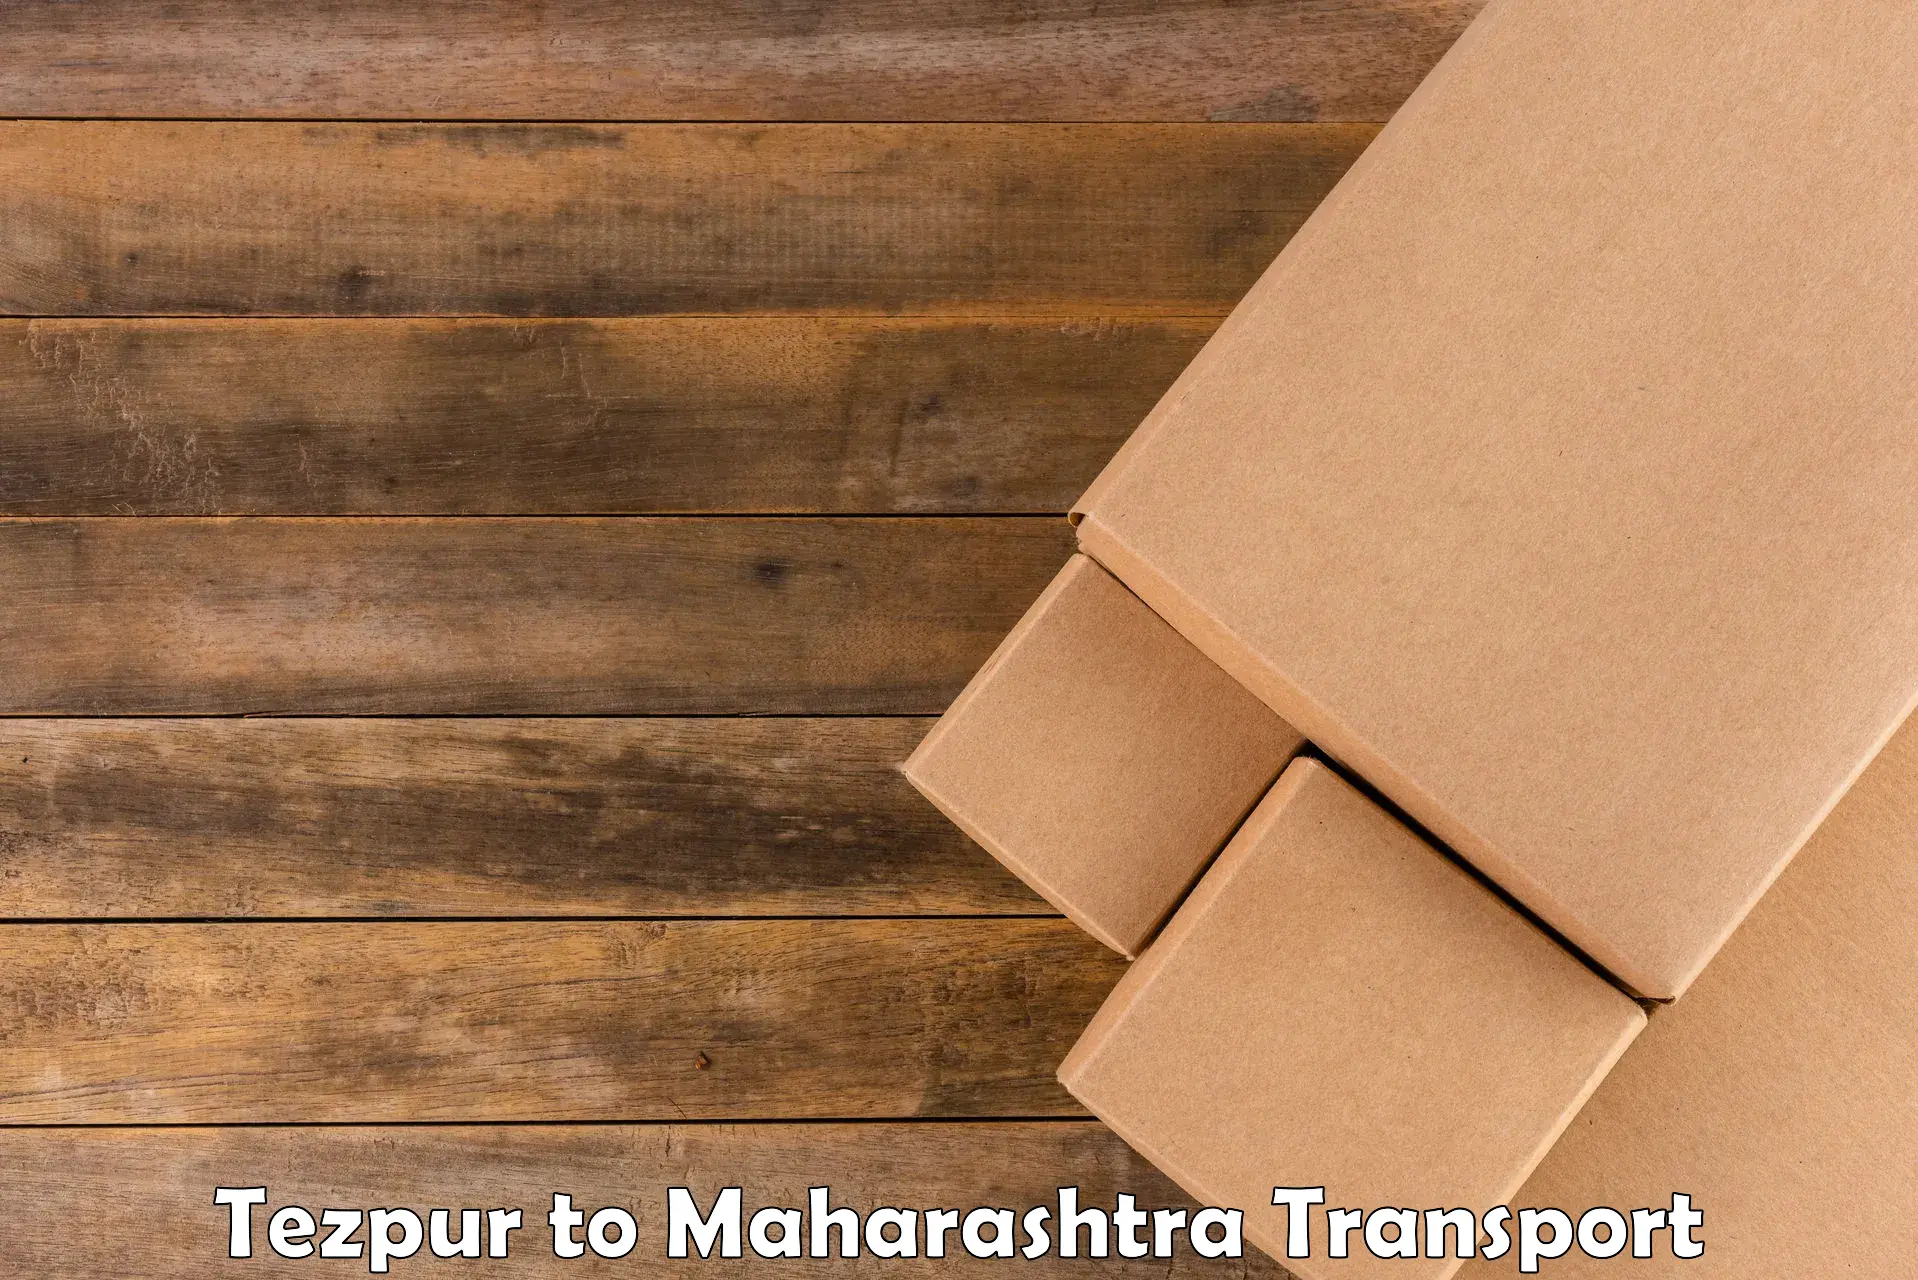 Air freight transport services Tezpur to Mahad